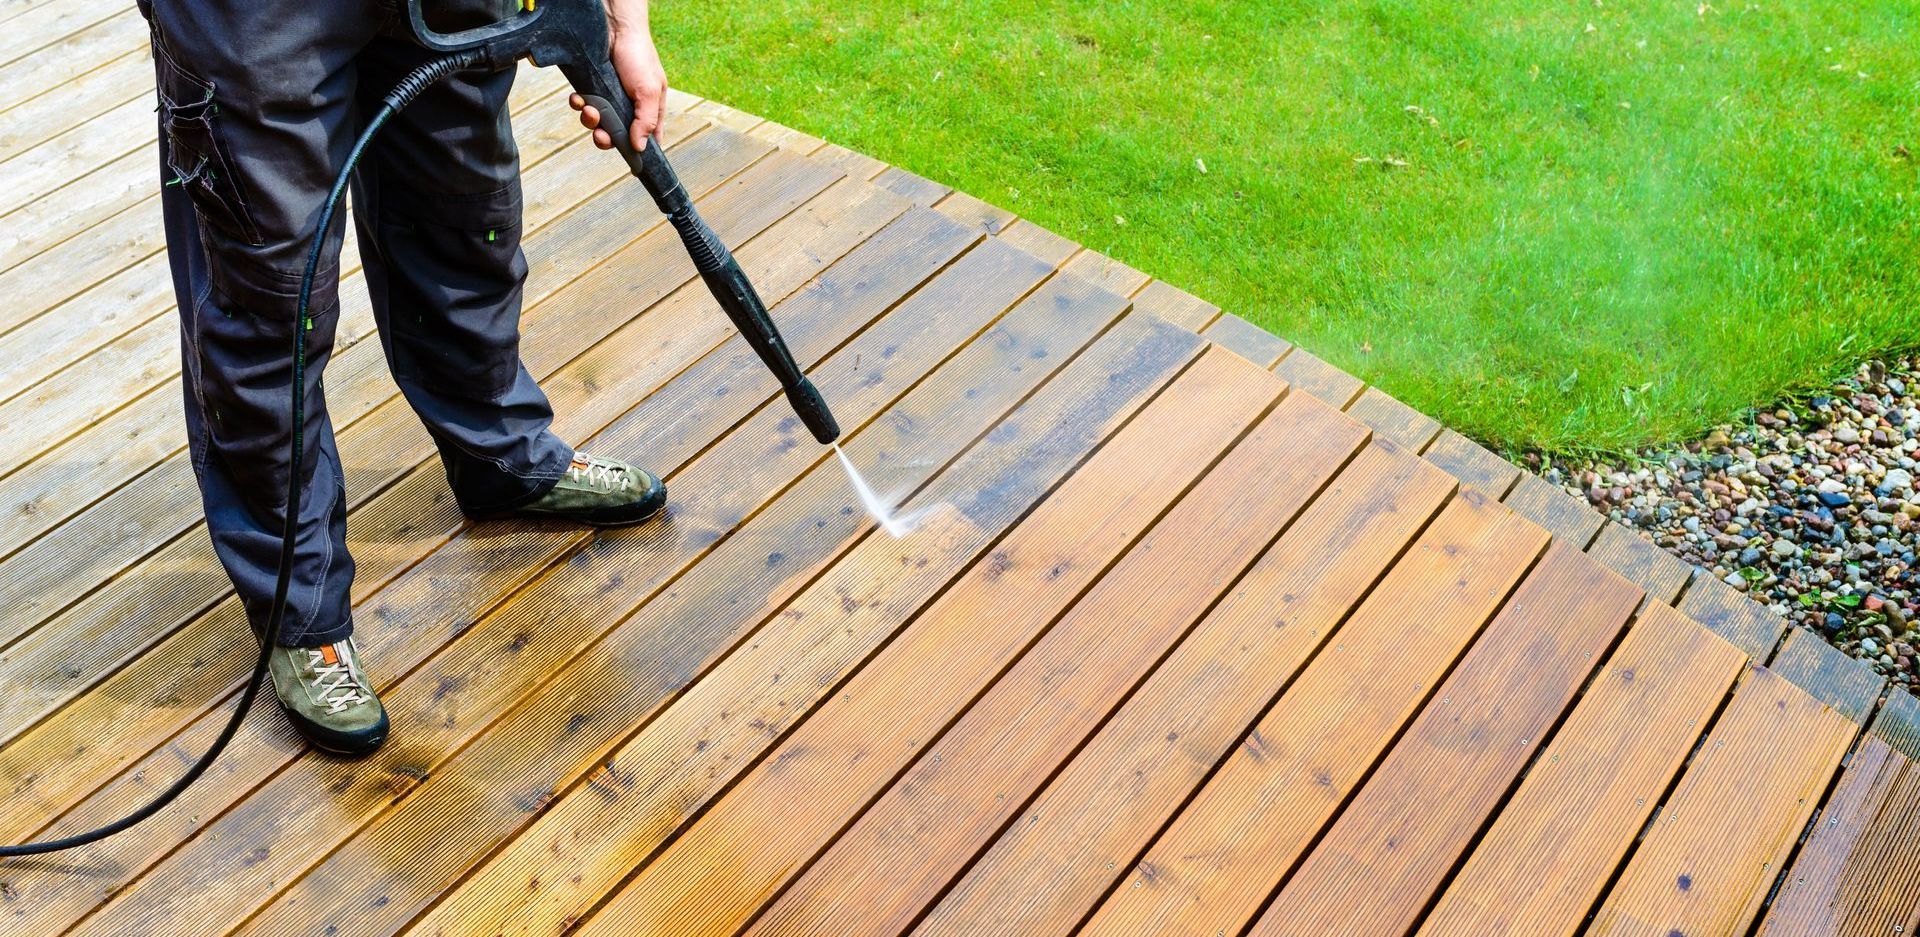 Best Residential Power Washing Company- Power Washer- Sykesville, MD